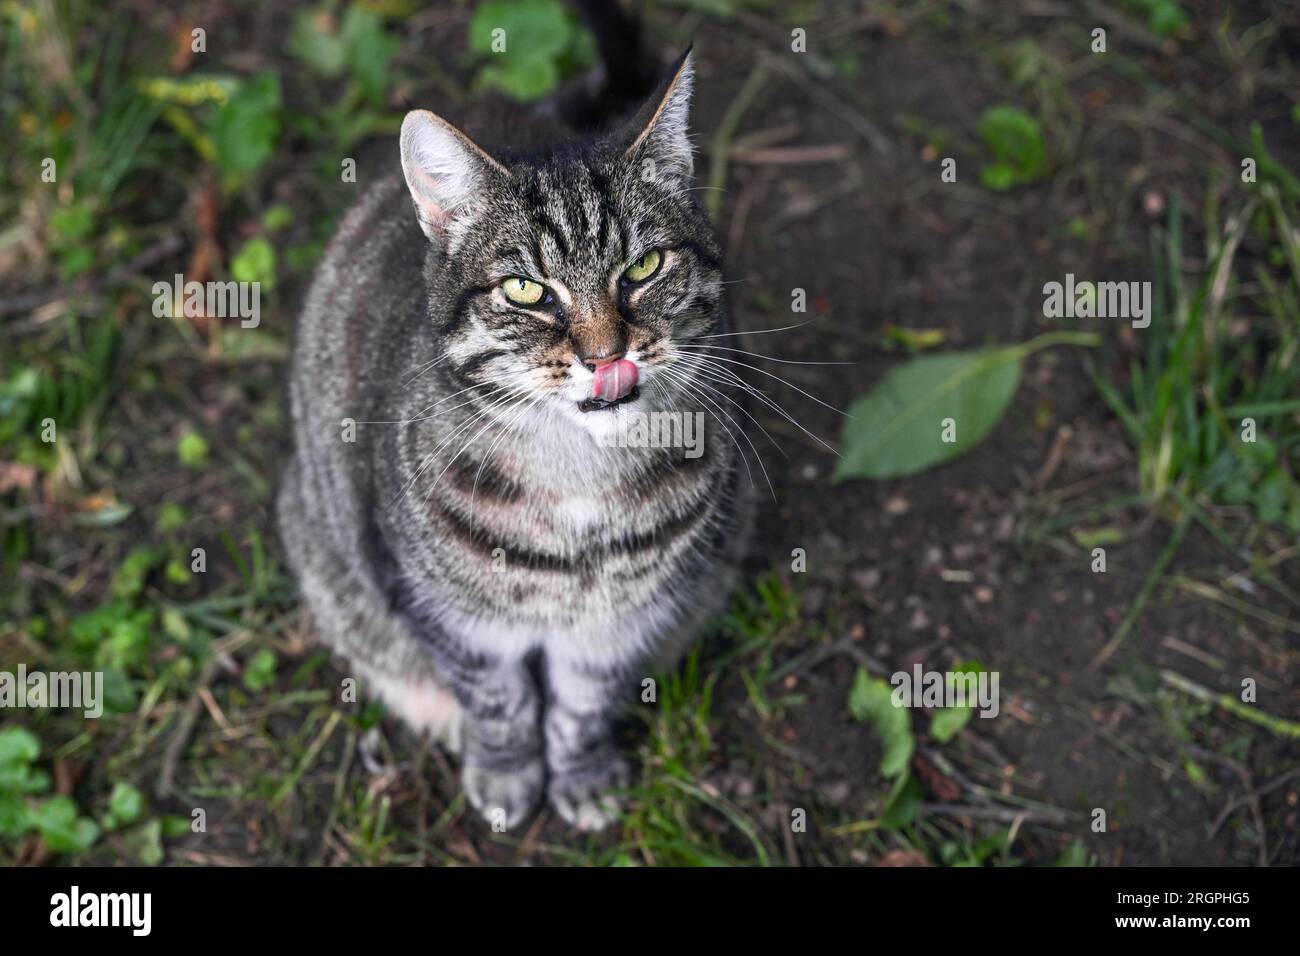 Hungry wild tabby cat sitting on the ground in a park, looking up and licking lips, hoping for something to eat, animal behavior, copy space, selected Stock Photo